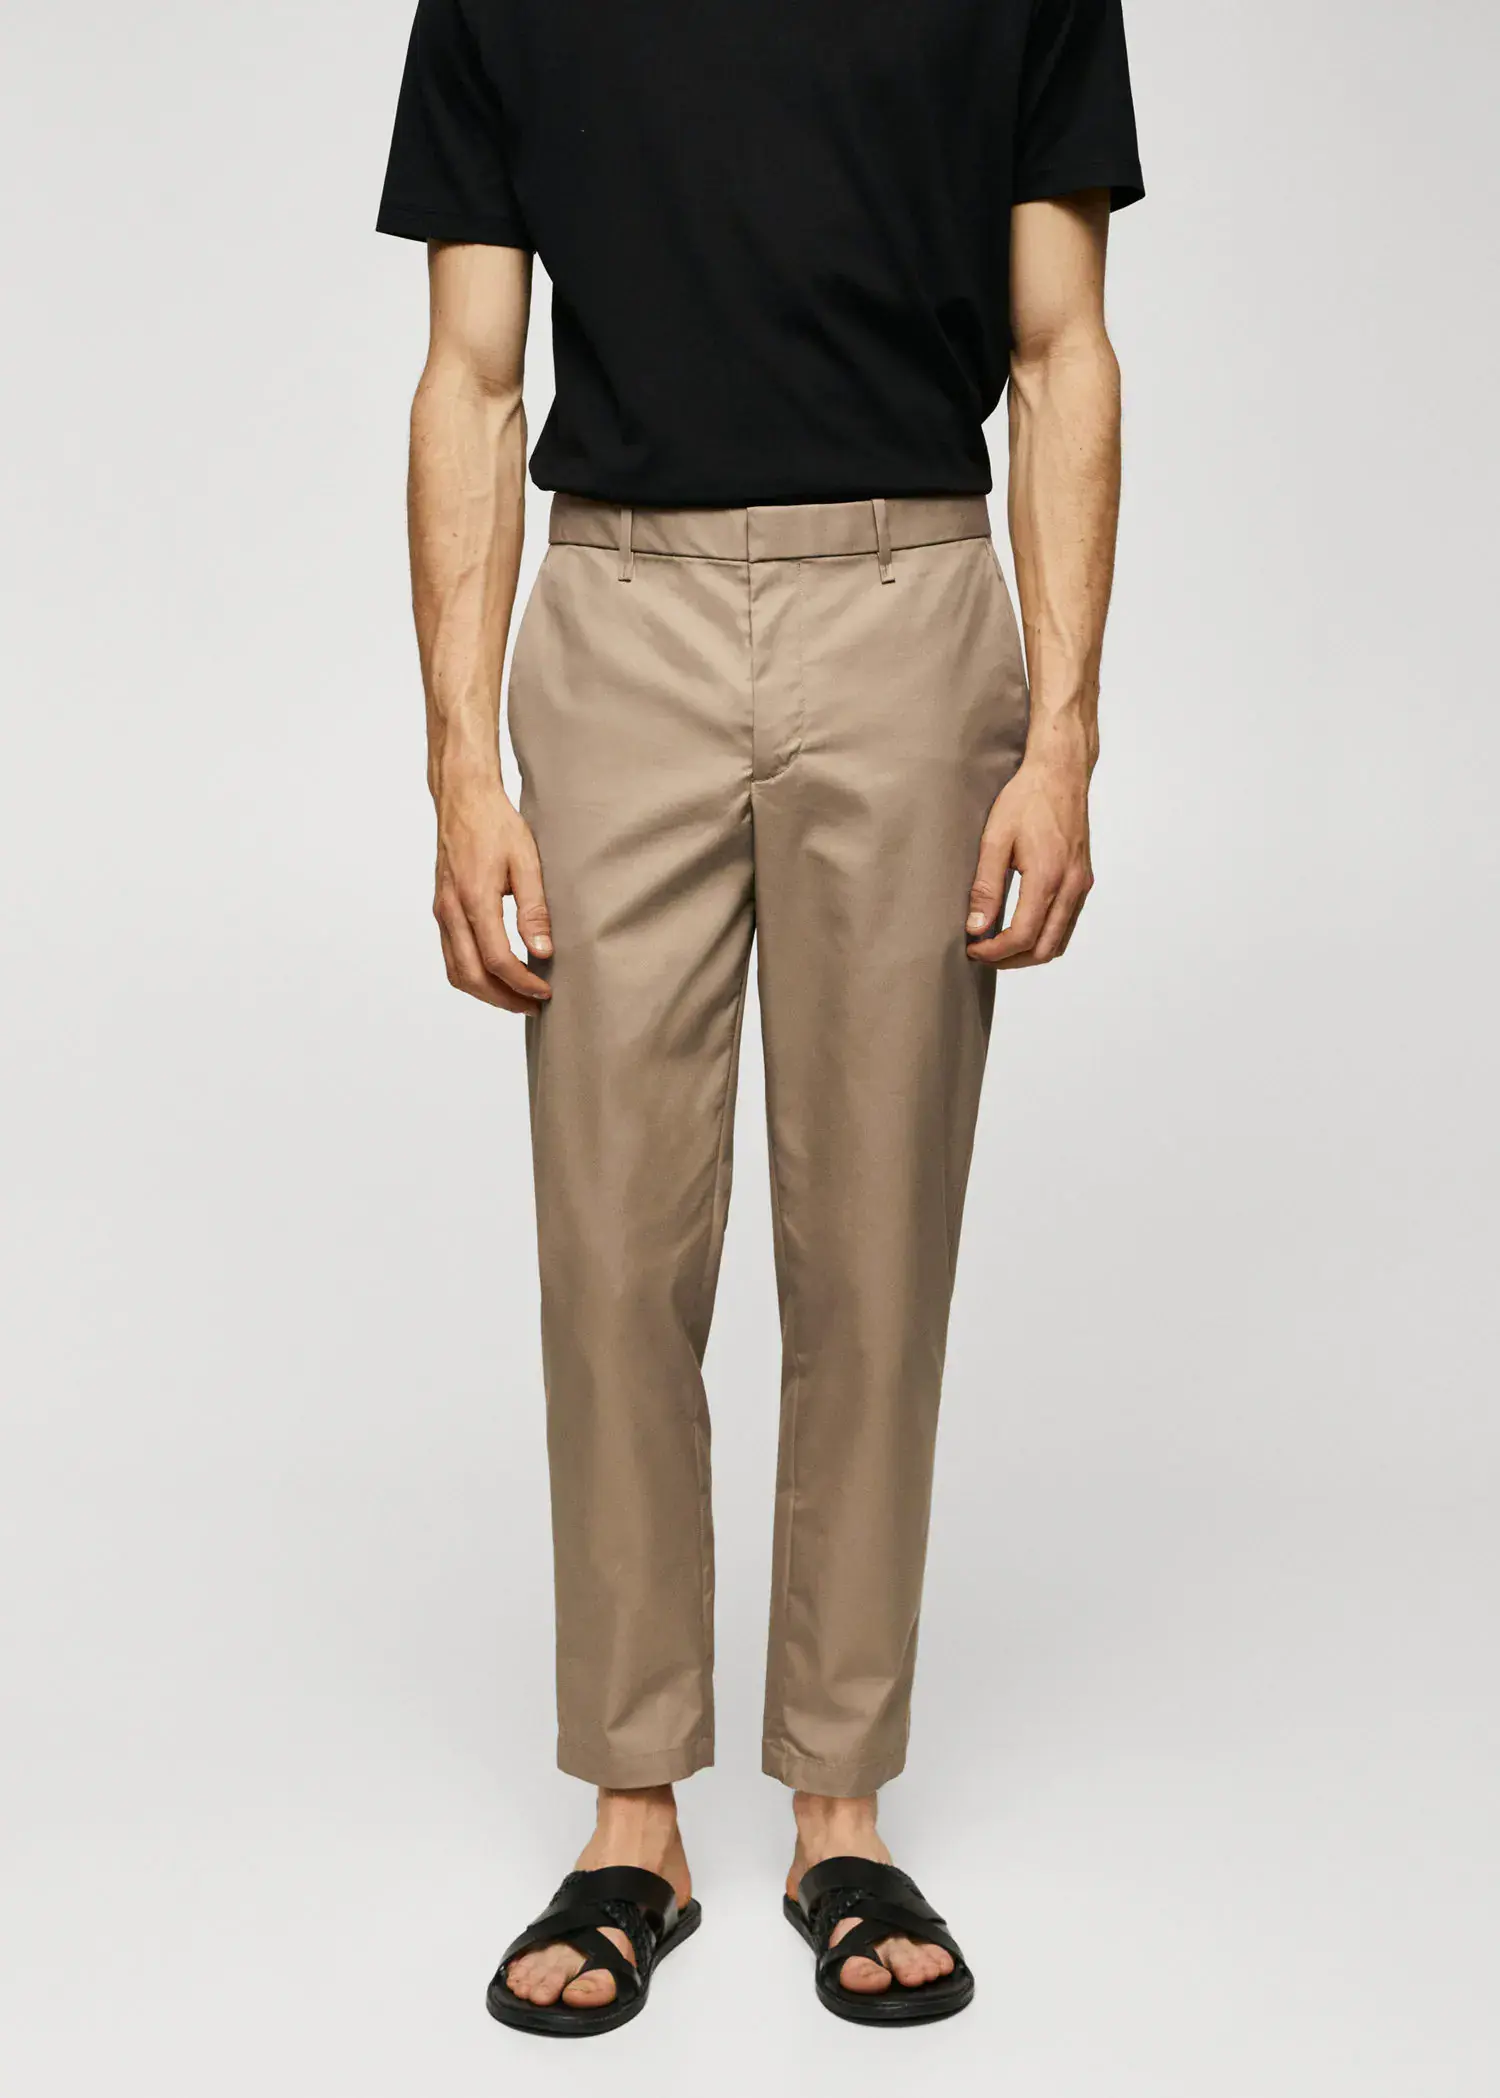 Mango Slim-fit cotton trousers. a man wearing a black shirt and beige pants. 